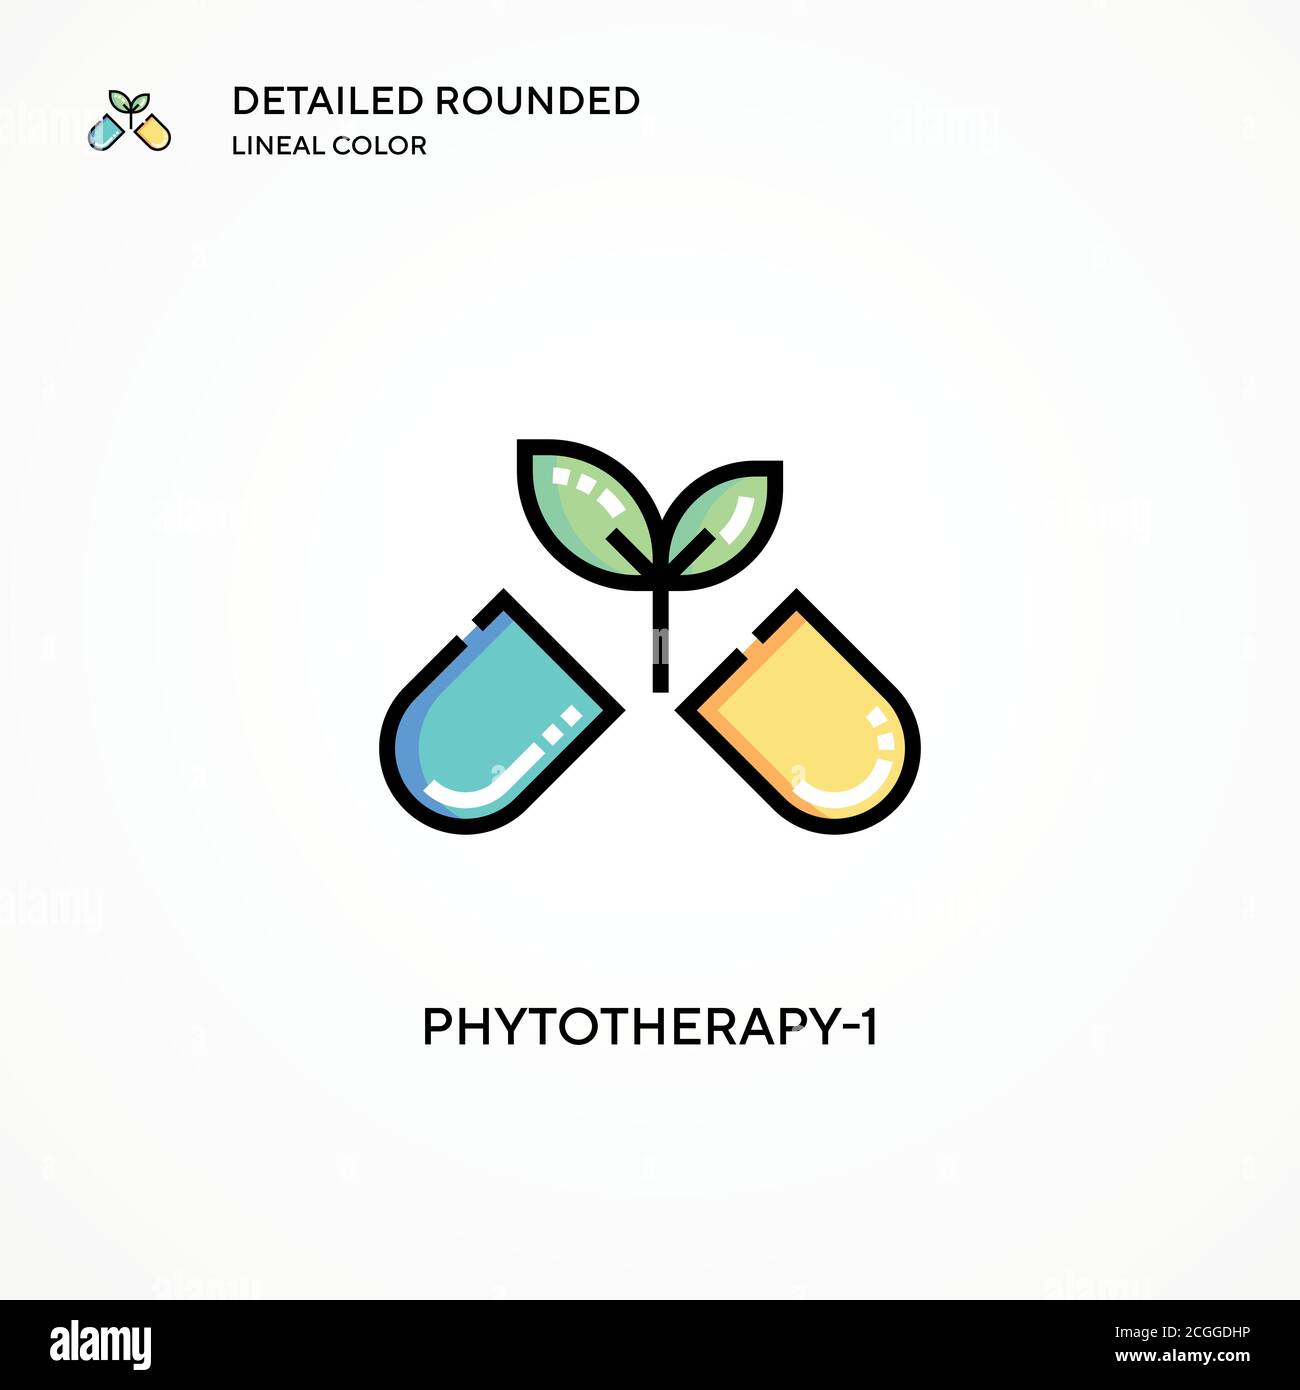 Phytotherapy-1 vector icon. Modern vector illustration concepts. Easy to edit and customize. Stock Vector